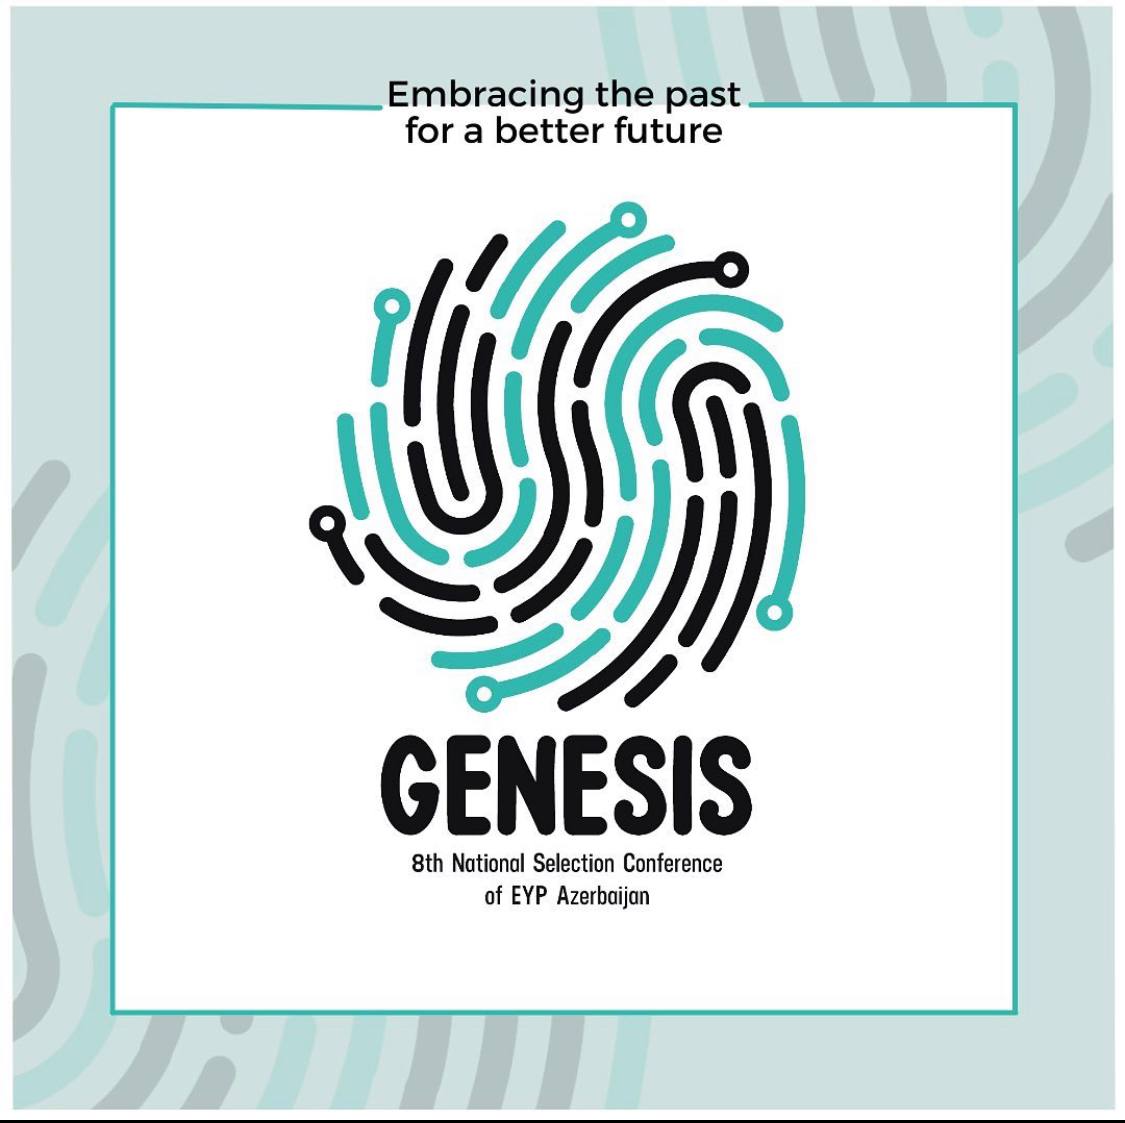 GENESIS – 8th National Selection Conference of EYP Azerbaijan